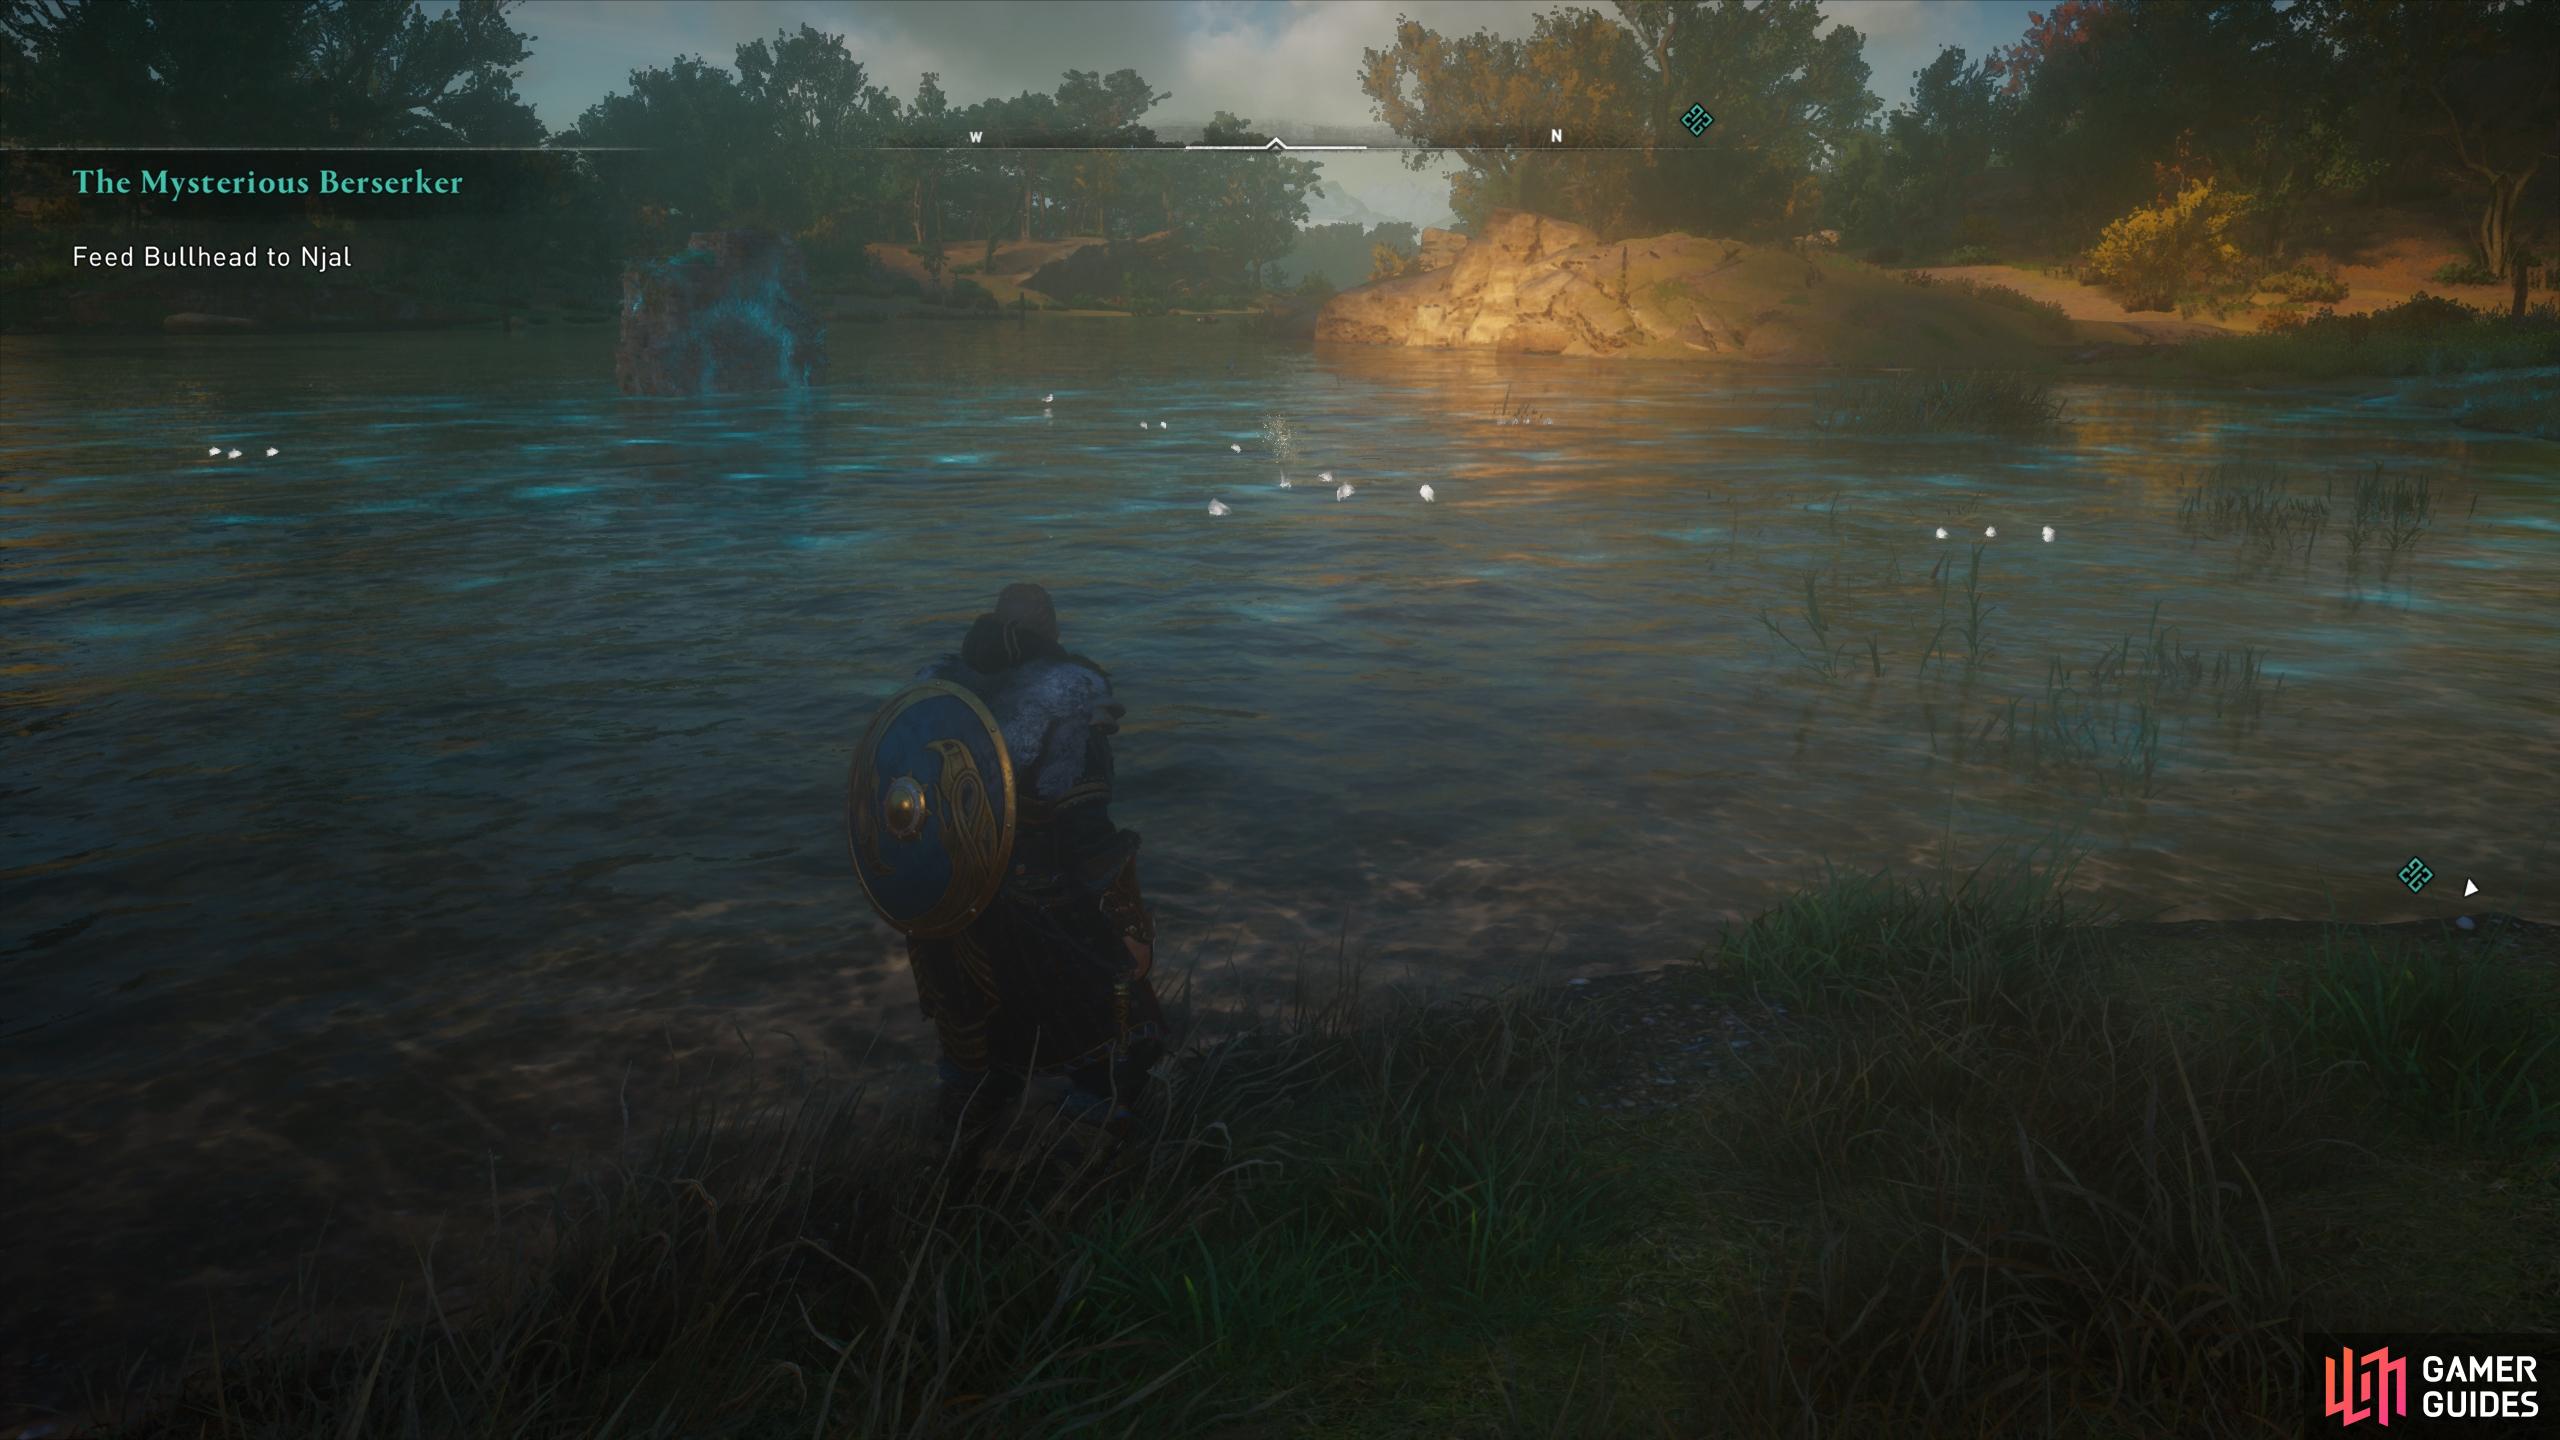 Use Odin's Sight to locate the position of the nearby fish.